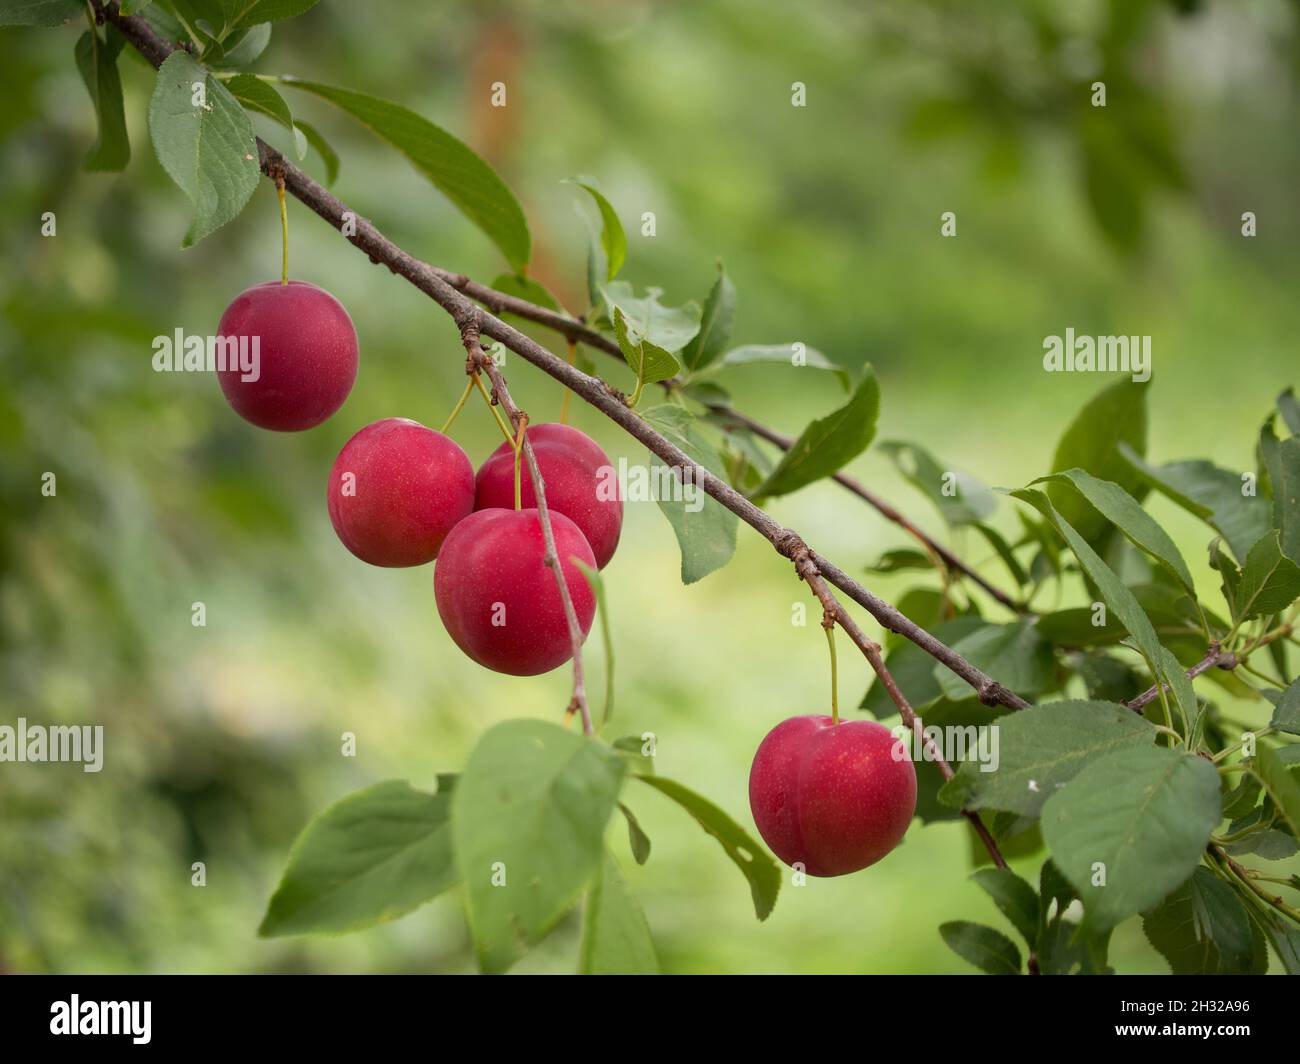 Ripe red cherry plum on a branch, close-up. Homegrown fruits. Stock Photo